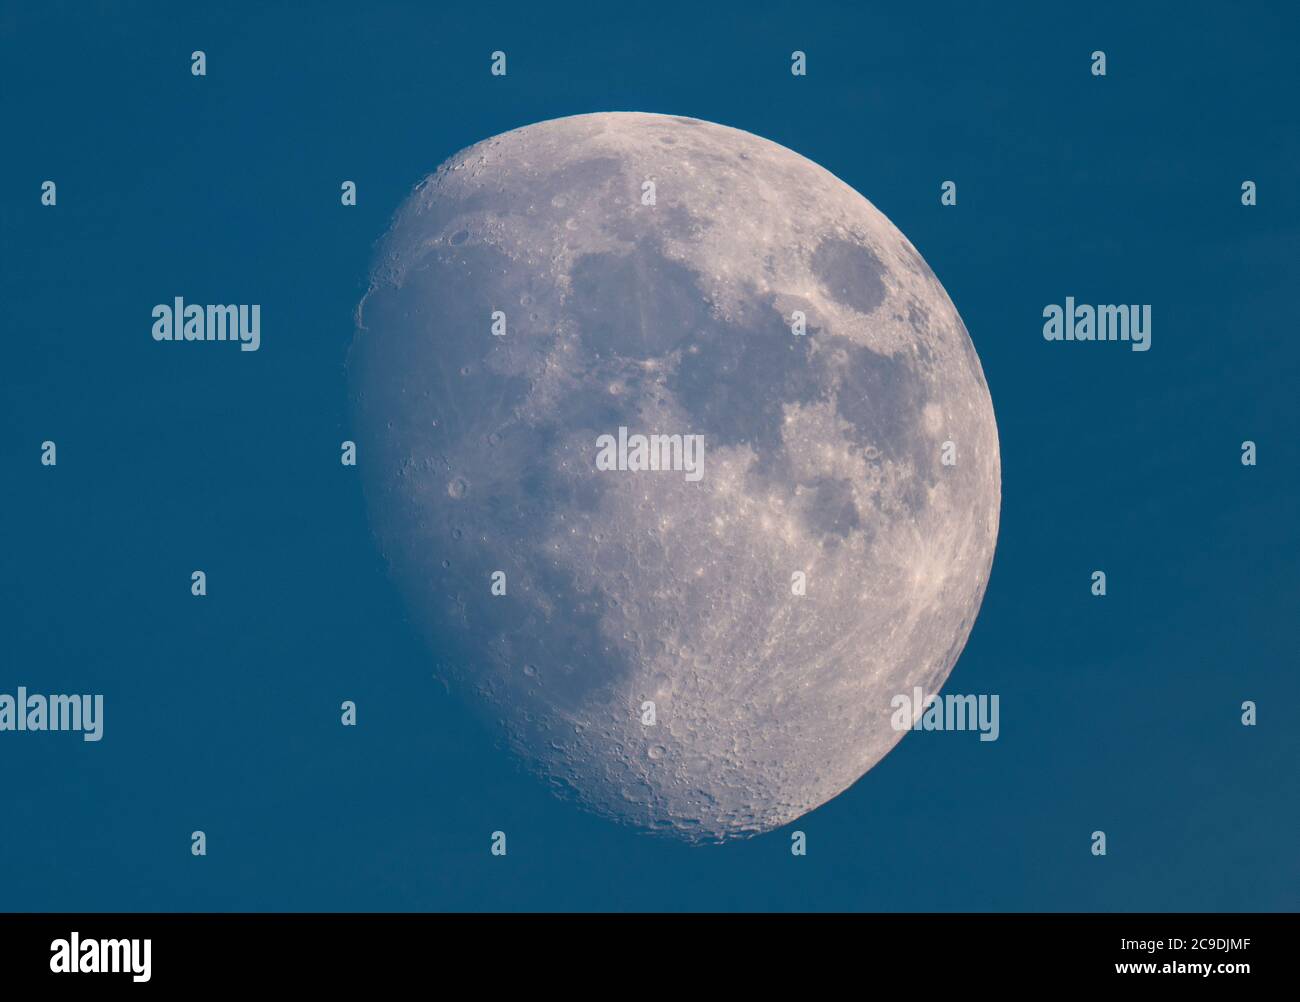 London, UK. 30 July 2020. An 84% illuminated Waxing Gibbous Moon above London in blue sky and a clear atmosphere, photographed through a telescope, showing crater detail on the south lunar pole. Credit: Malcolm Park/Alamy Live News Stock Photo